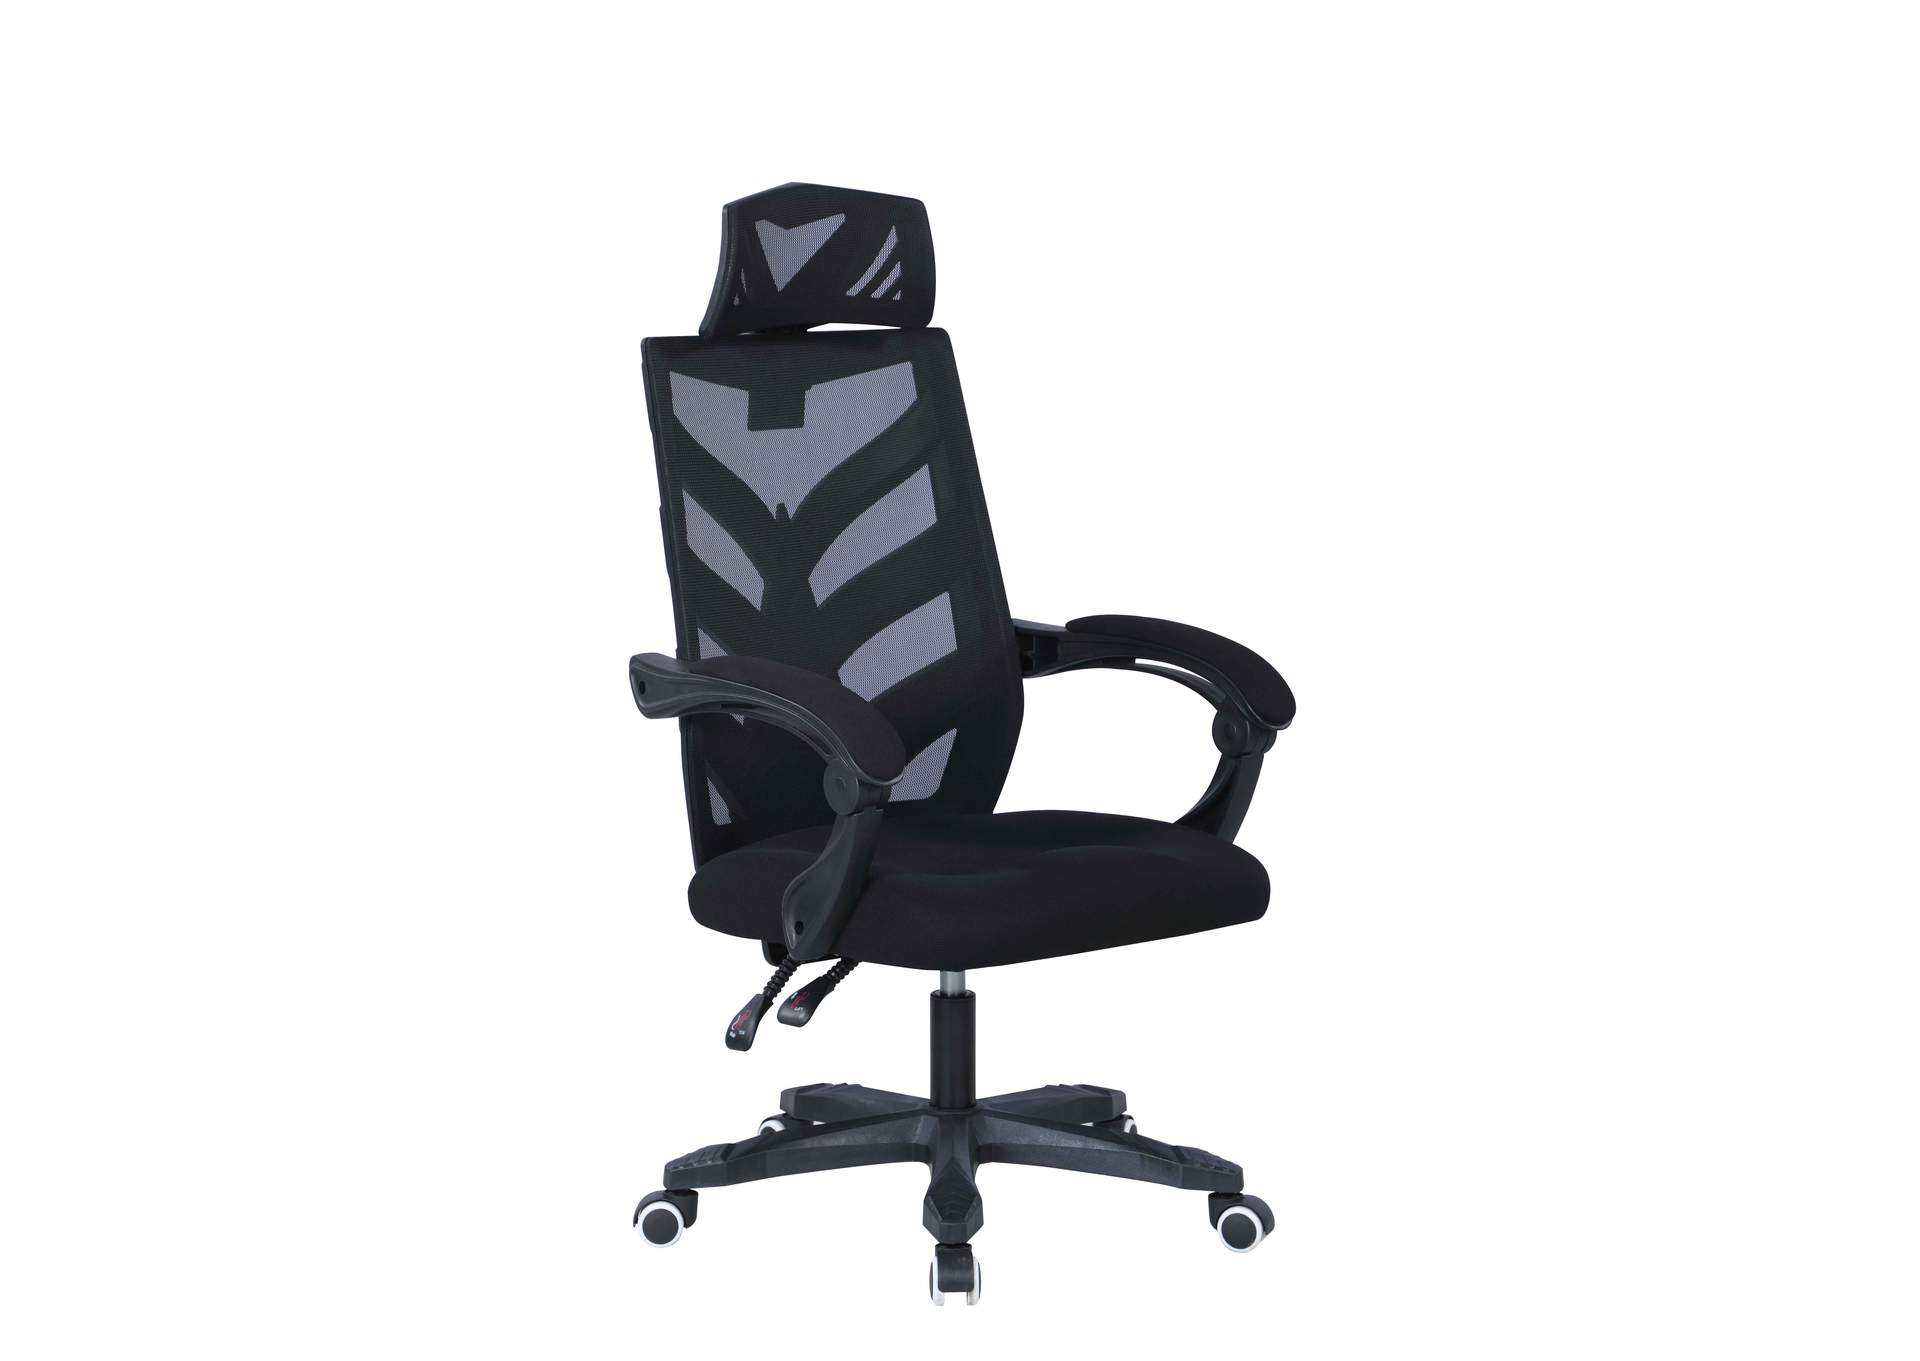 Reclining Computer Chair With Headrest & Padded Arms,Chintaly Imports